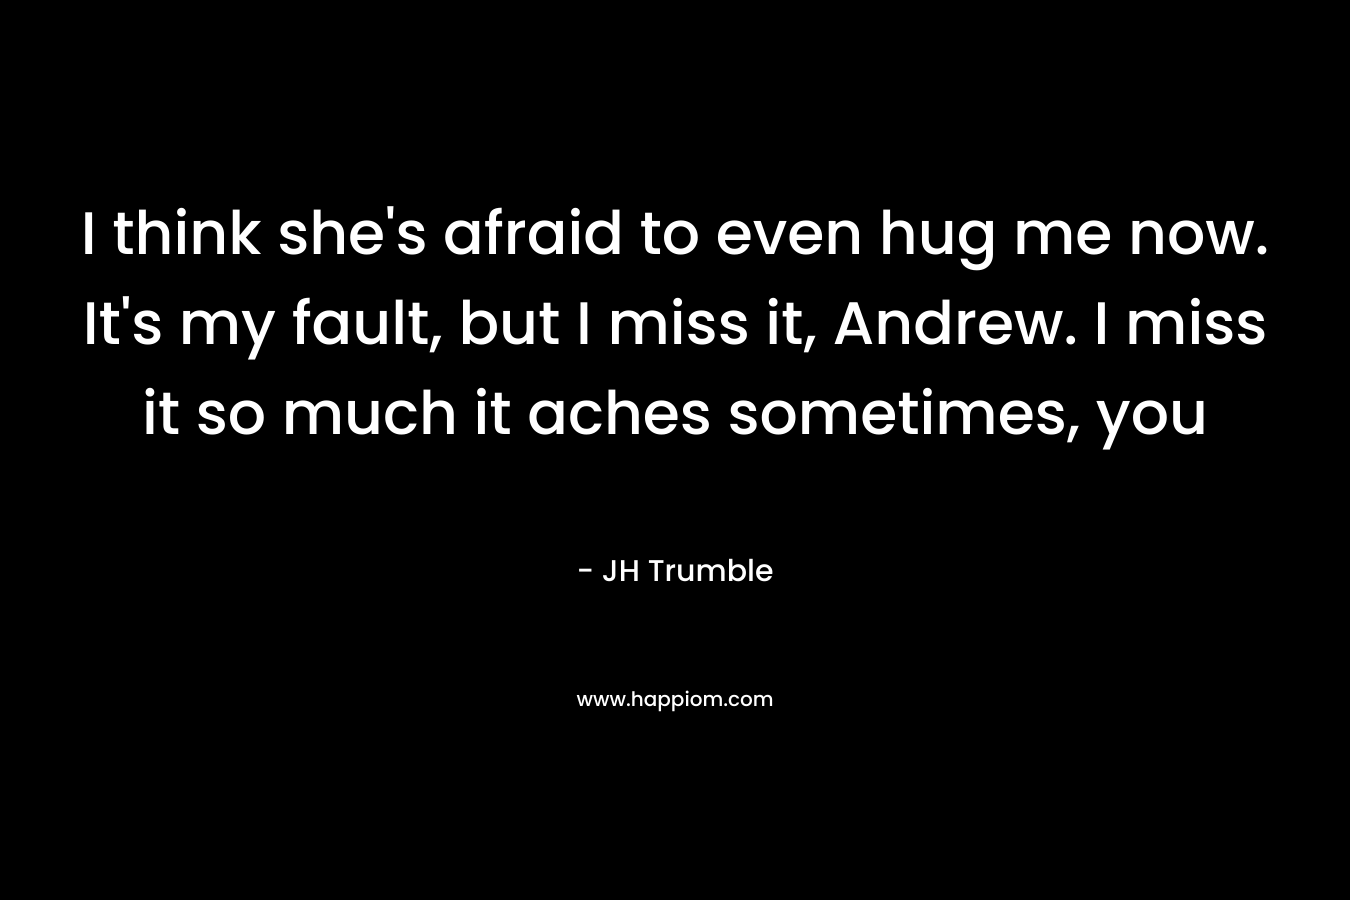 I think she's afraid to even hug me now. It's my fault, but I miss it, Andrew. I miss it so much it aches sometimes, you 